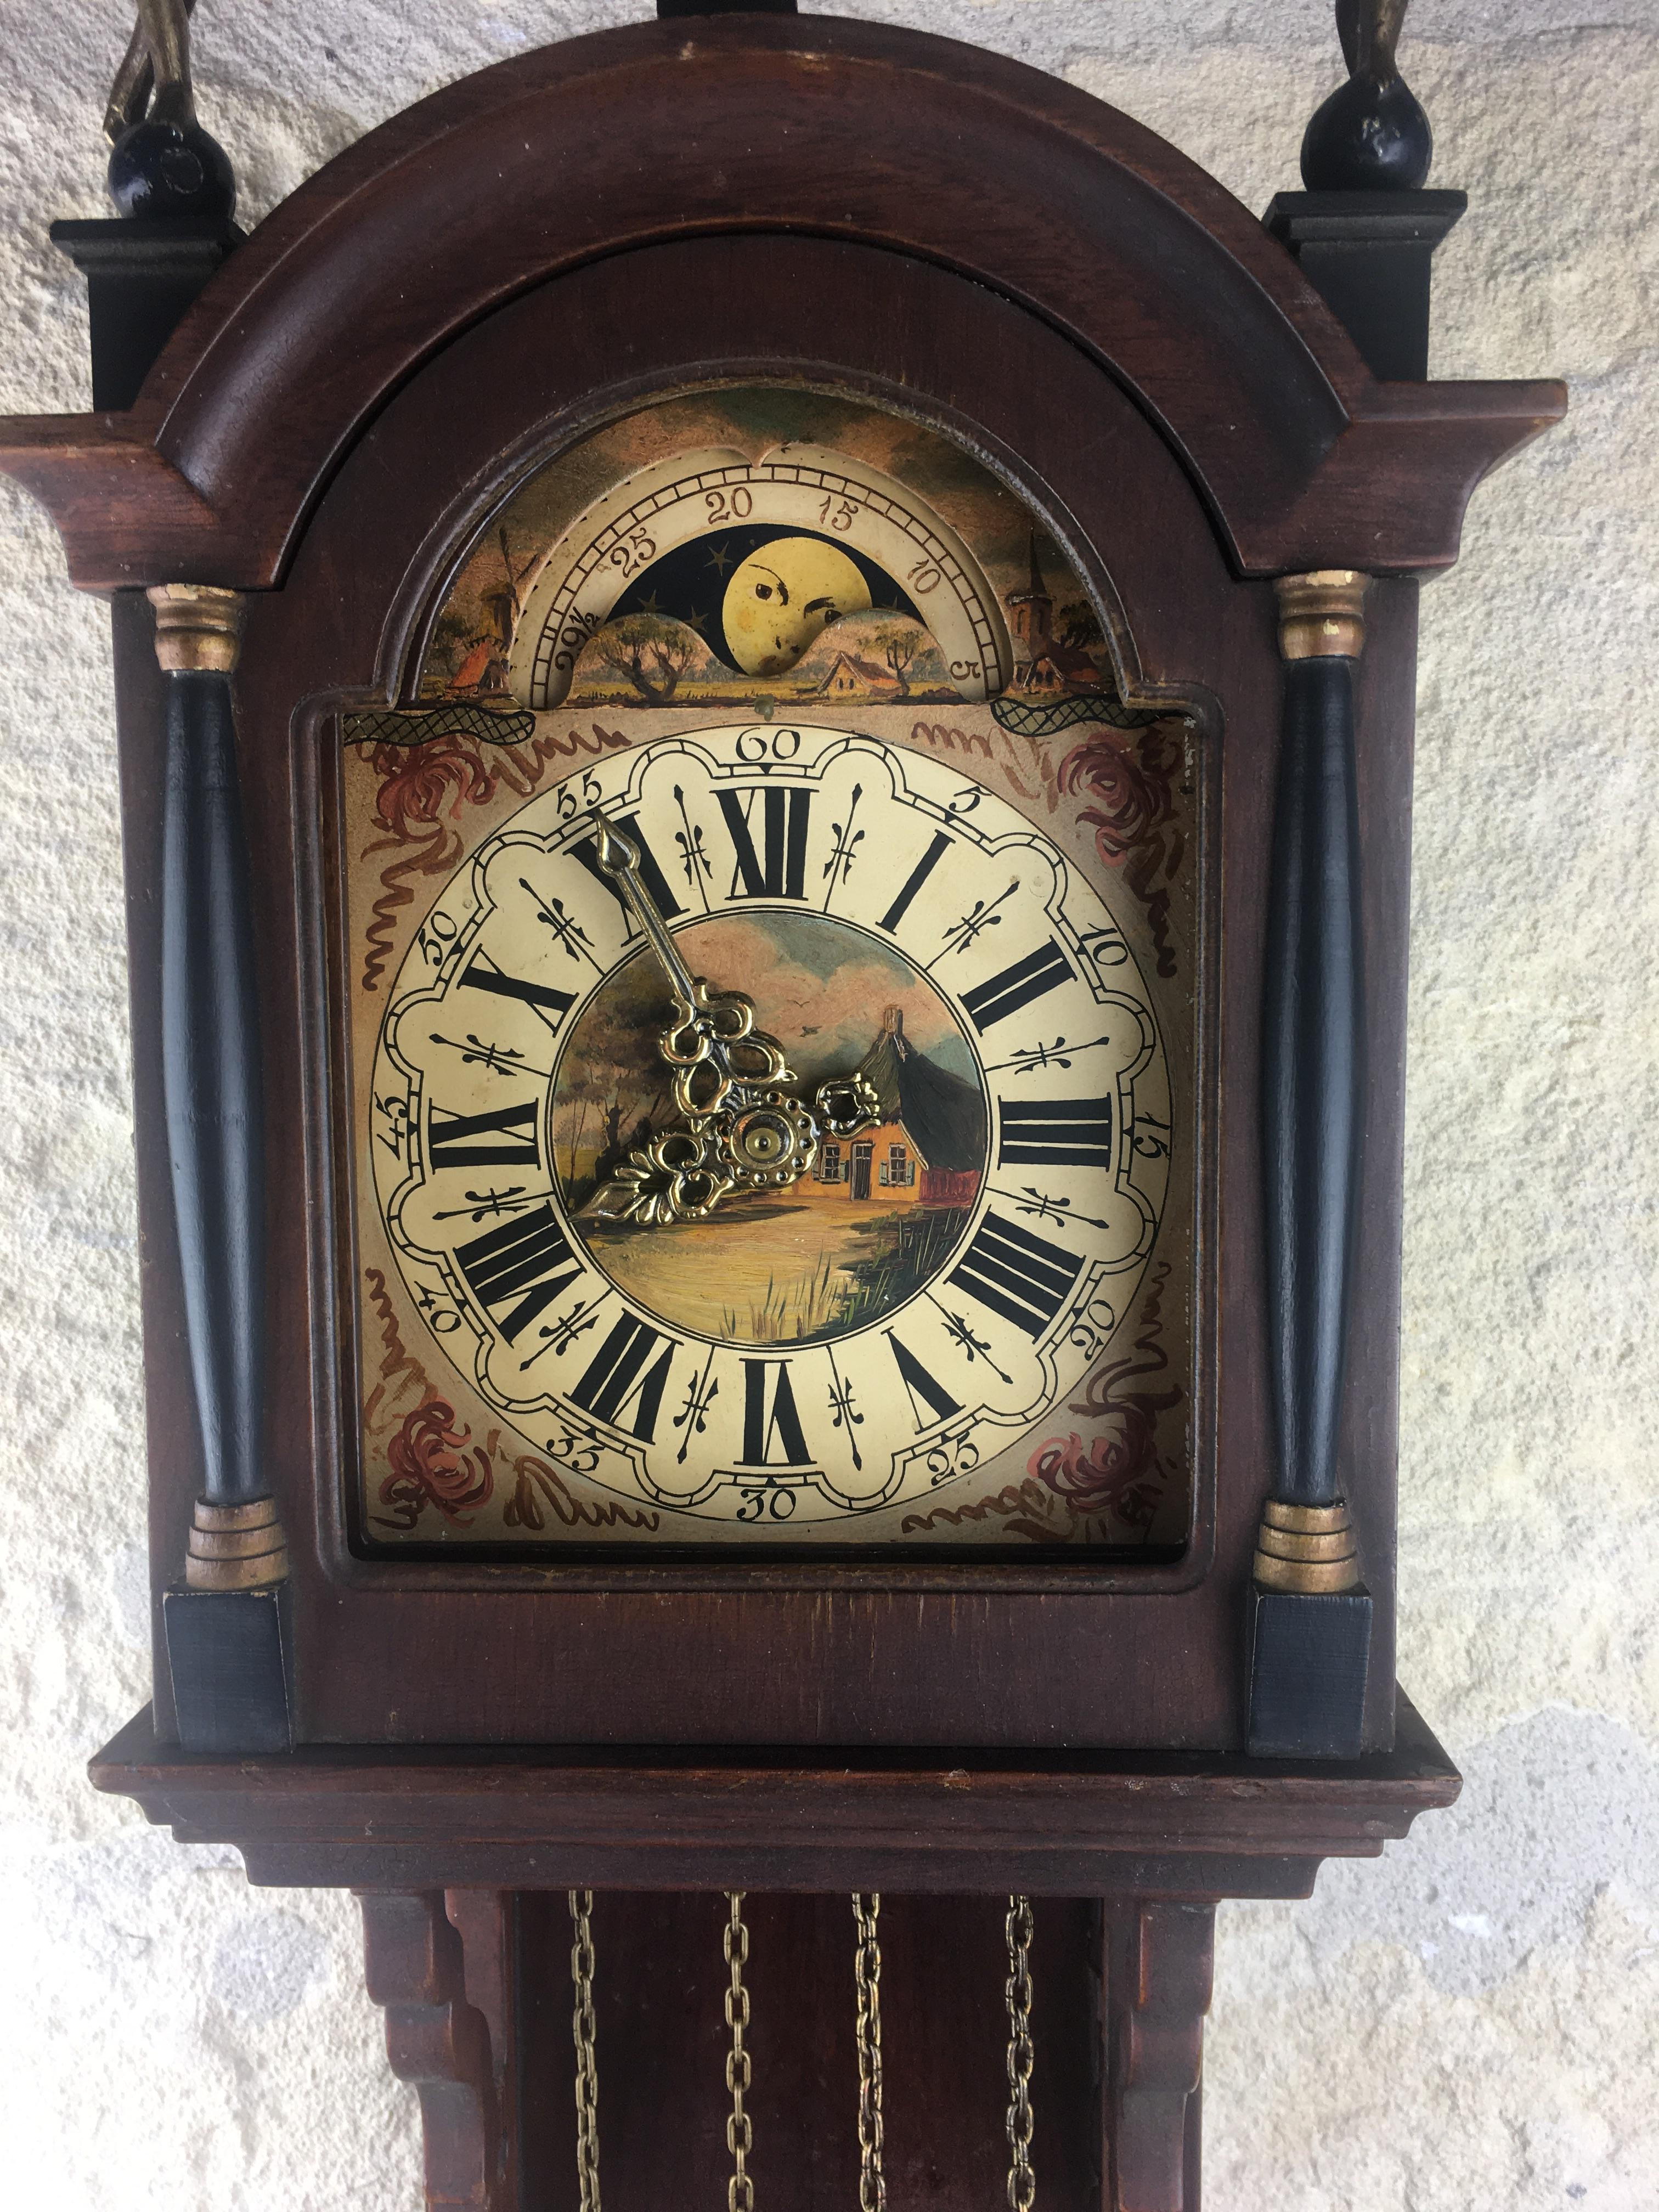 An original vintage Dutch Friesian Schippertje clock. This type of clock was called Schippertje (means Skipper), because it was used on Dutch boats. This is because they were able to keep running as the boat was rocking on the sea. Later on, the